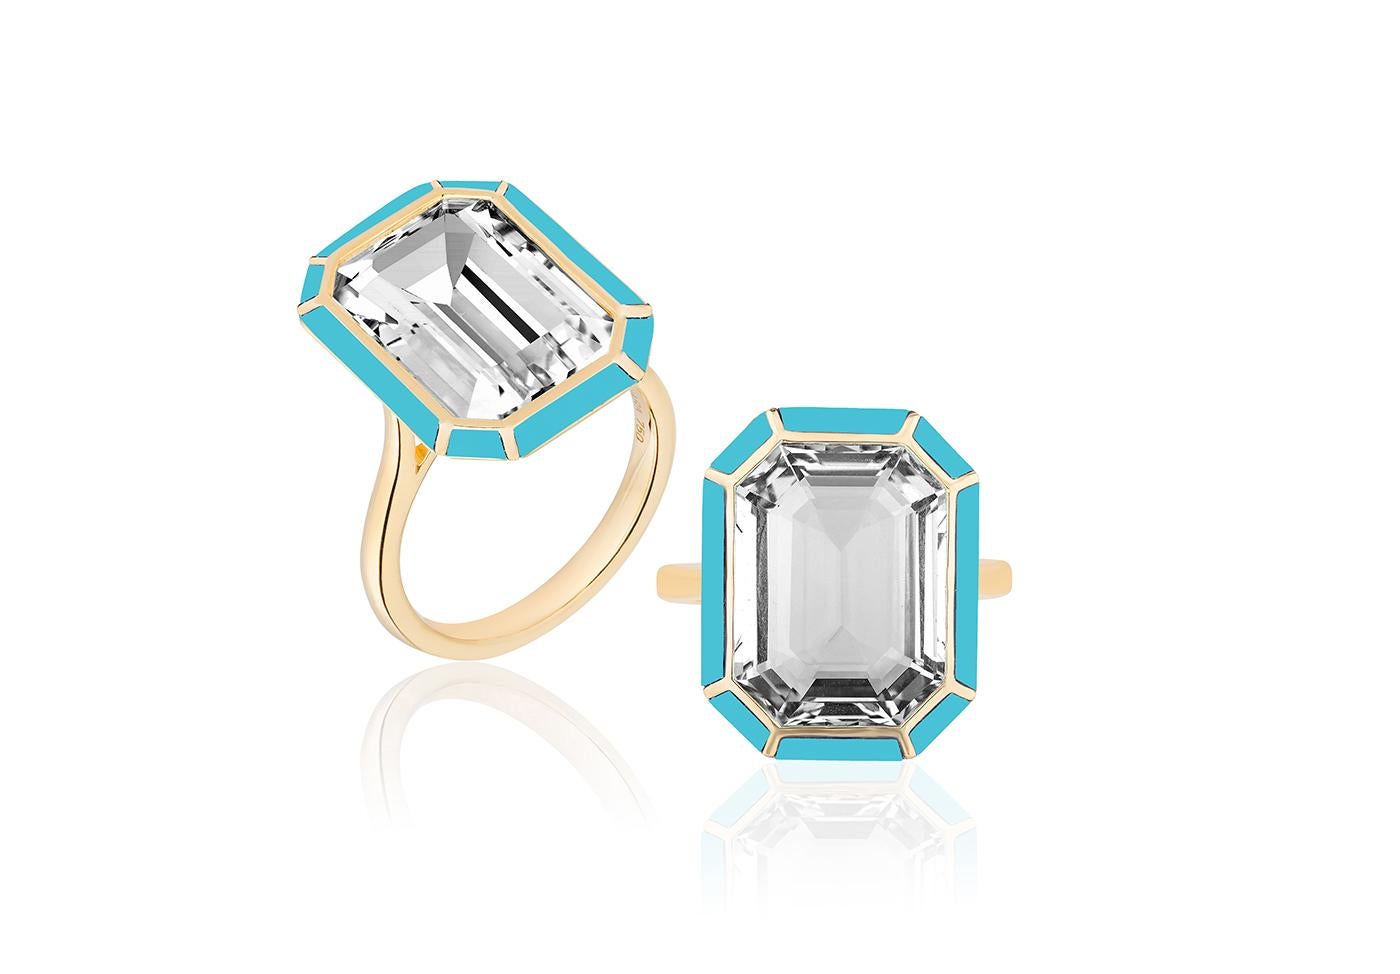 This Rock Crystal and Turquoise Ring from the 'Melange' Collection is an elegant and eye-catching piece of jewelry. It is crafted from 18K yellow gold and features a beautiful combination of Rock Crystal and Turquoise gemstones. The ring's unique